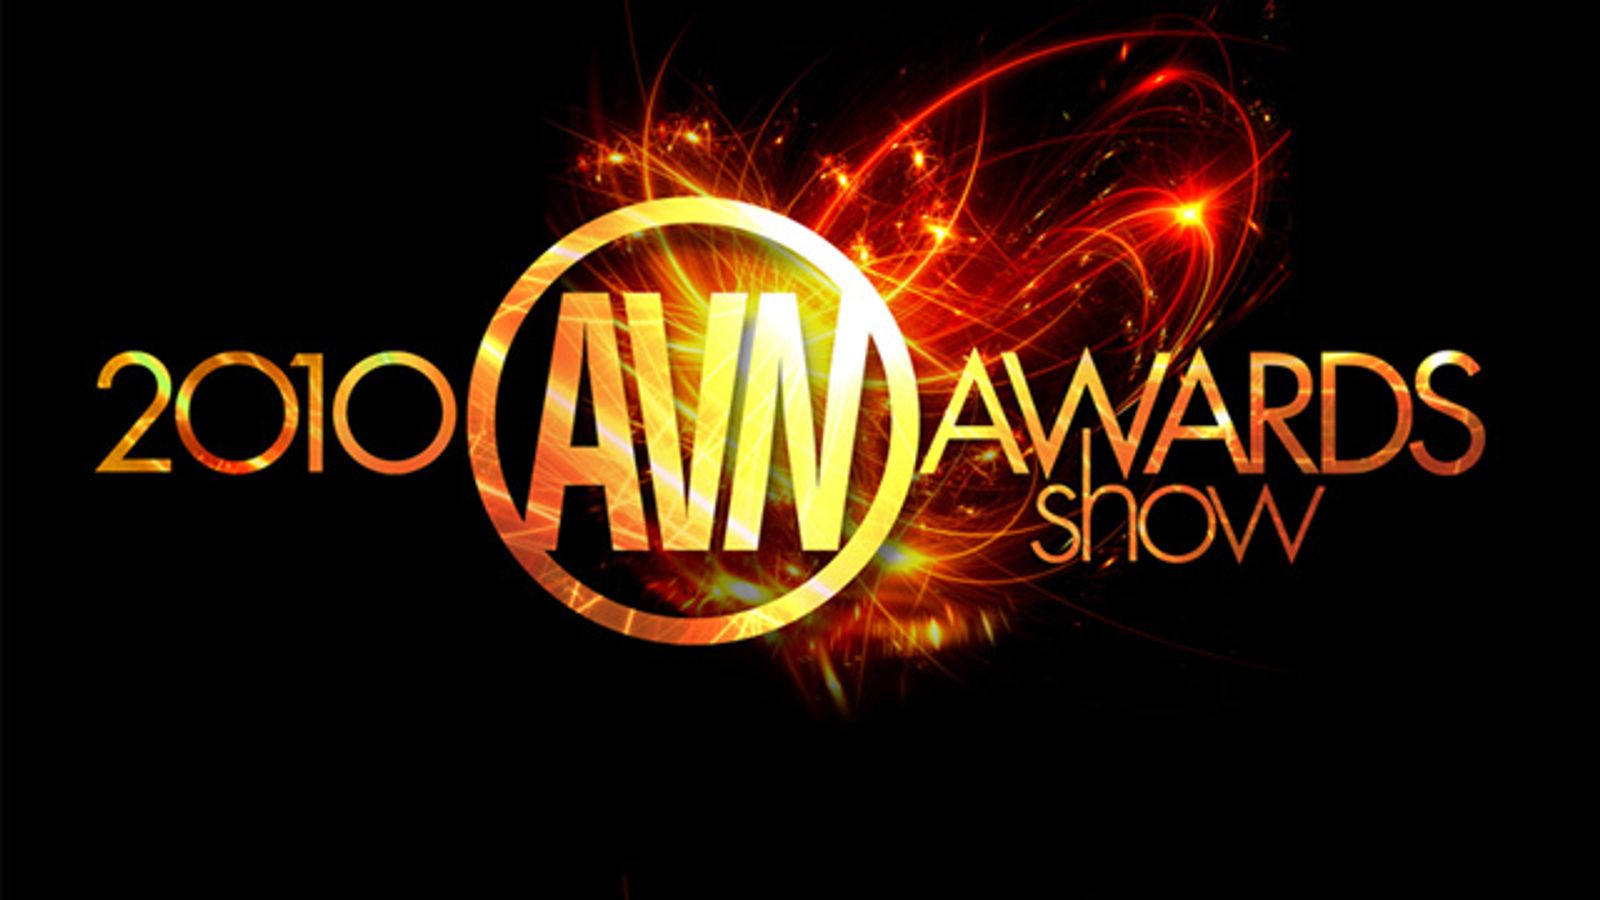 Pre-Nominations Site Open for 2010 AVN Awards